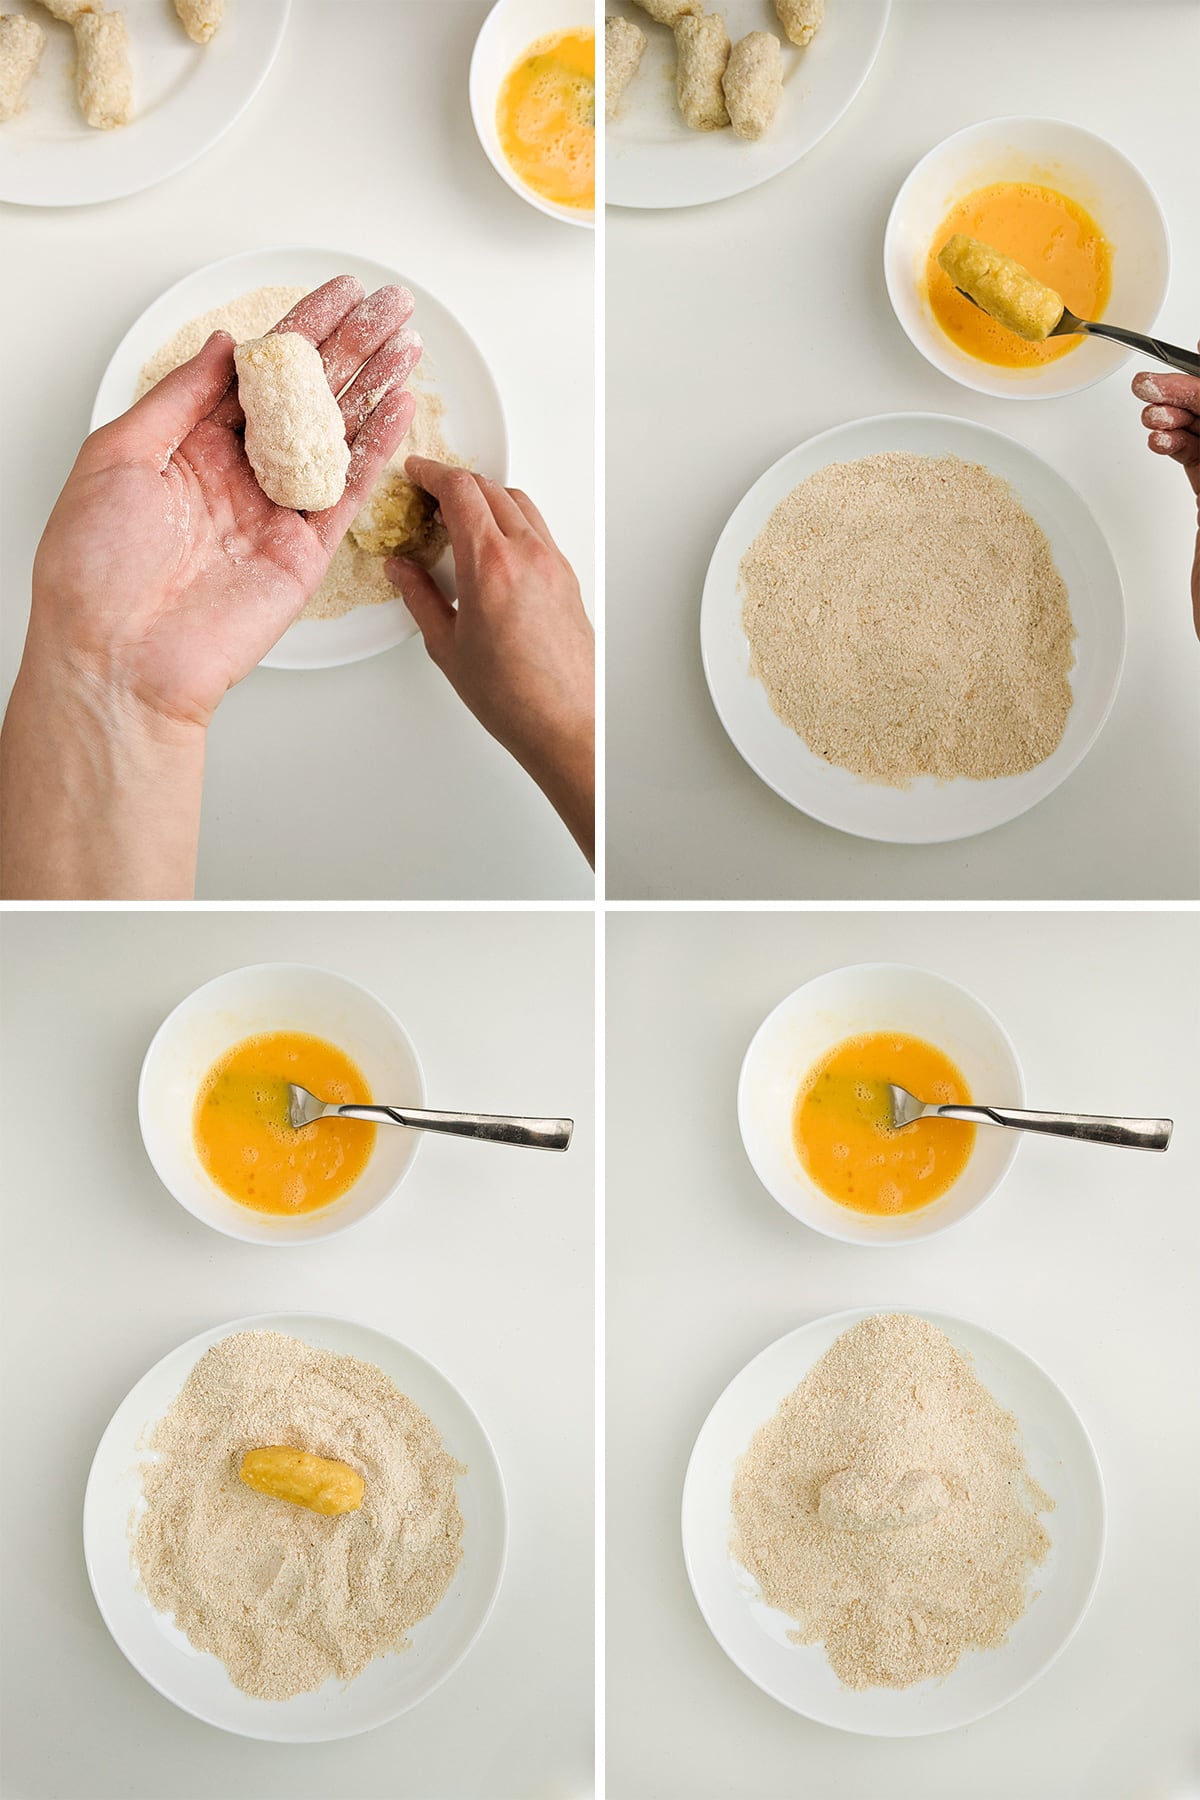 Step-by-step forming the chili nuggets, soaking them in an egg then covering in breadcrumbs.